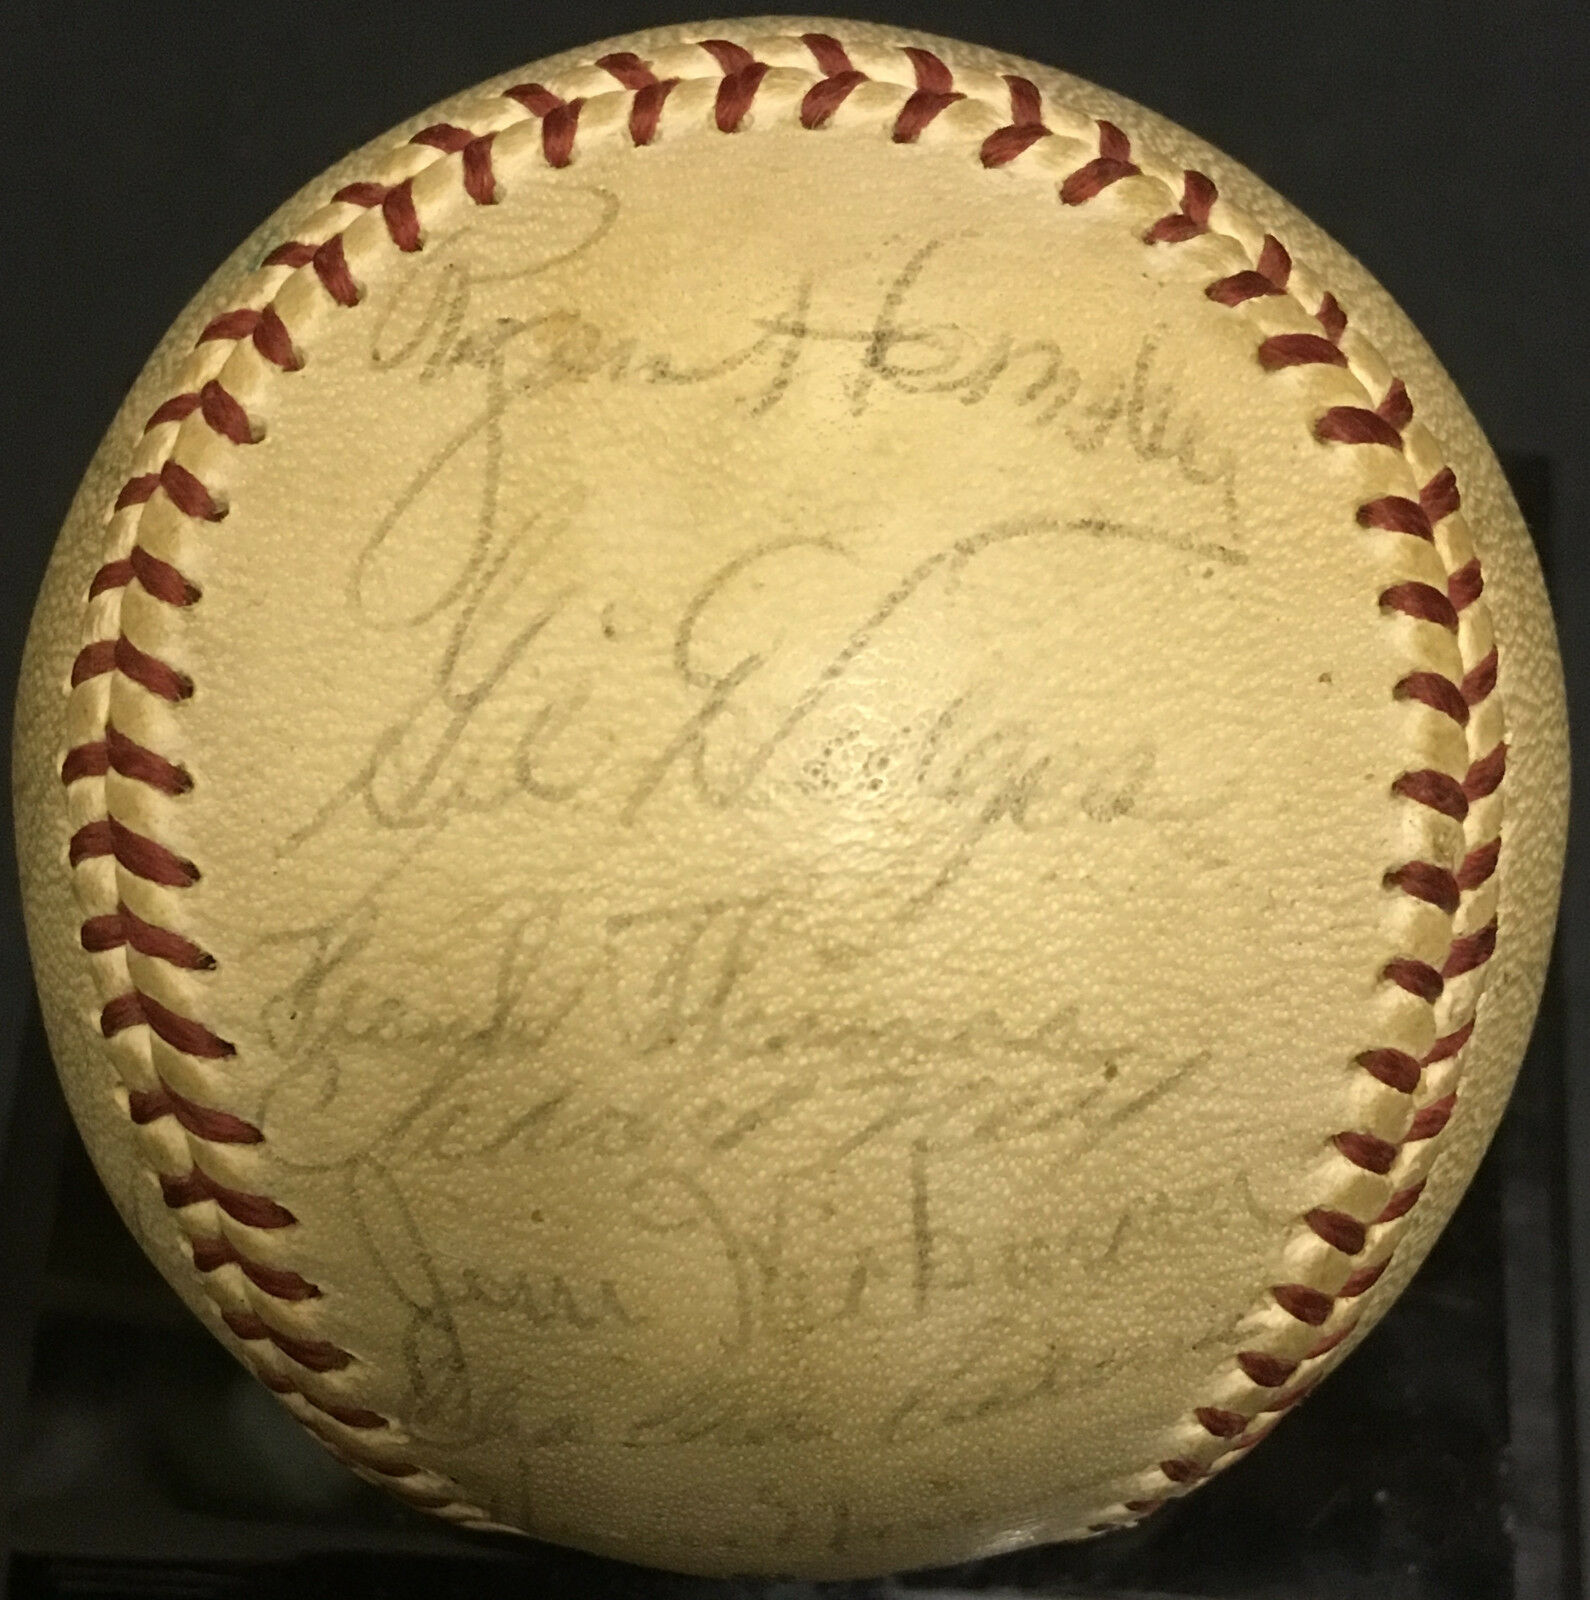 1962 Mets team signed baseball 30 auto Gil Hodges Rogers Hornsby Red Ruffing JSA